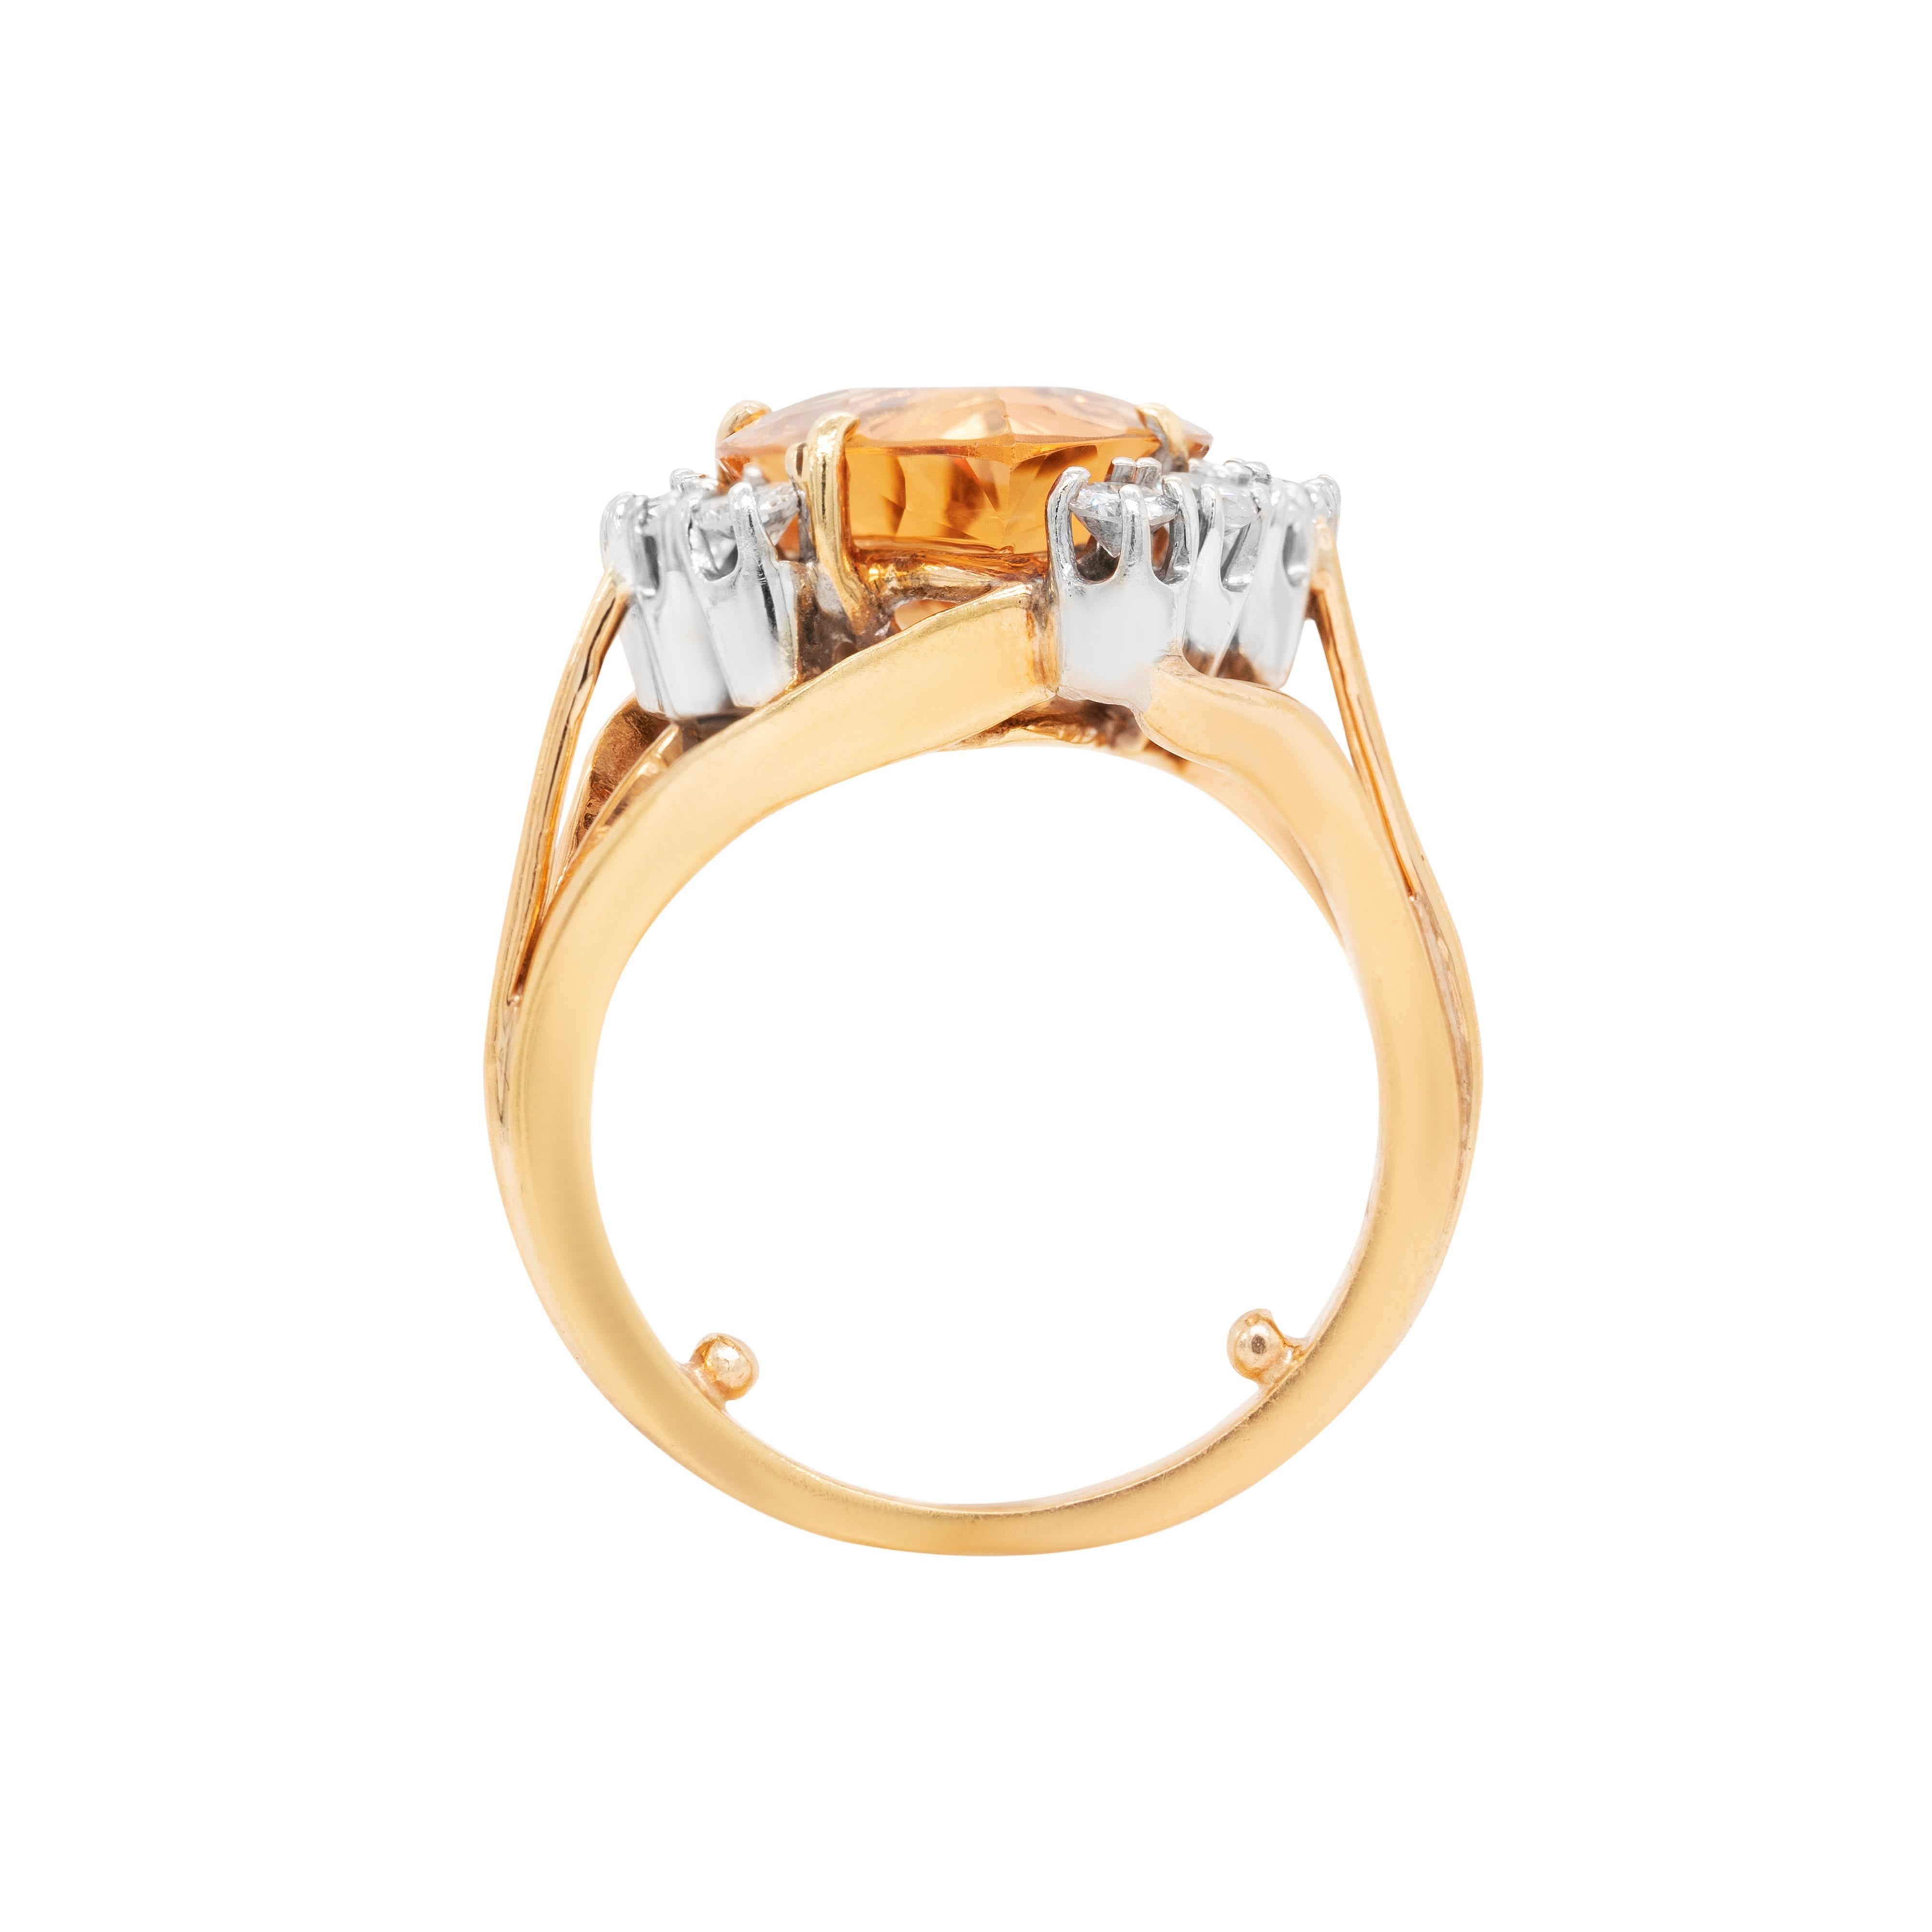 This wonderful 18 carat yellow gold cocktail ring features a spectacular pear shaped golden imperial topaz weighing 7.82ct, mounted in a four claw, open back setting. The incredible stone is decorated with 10 fine quality round brilliant cut